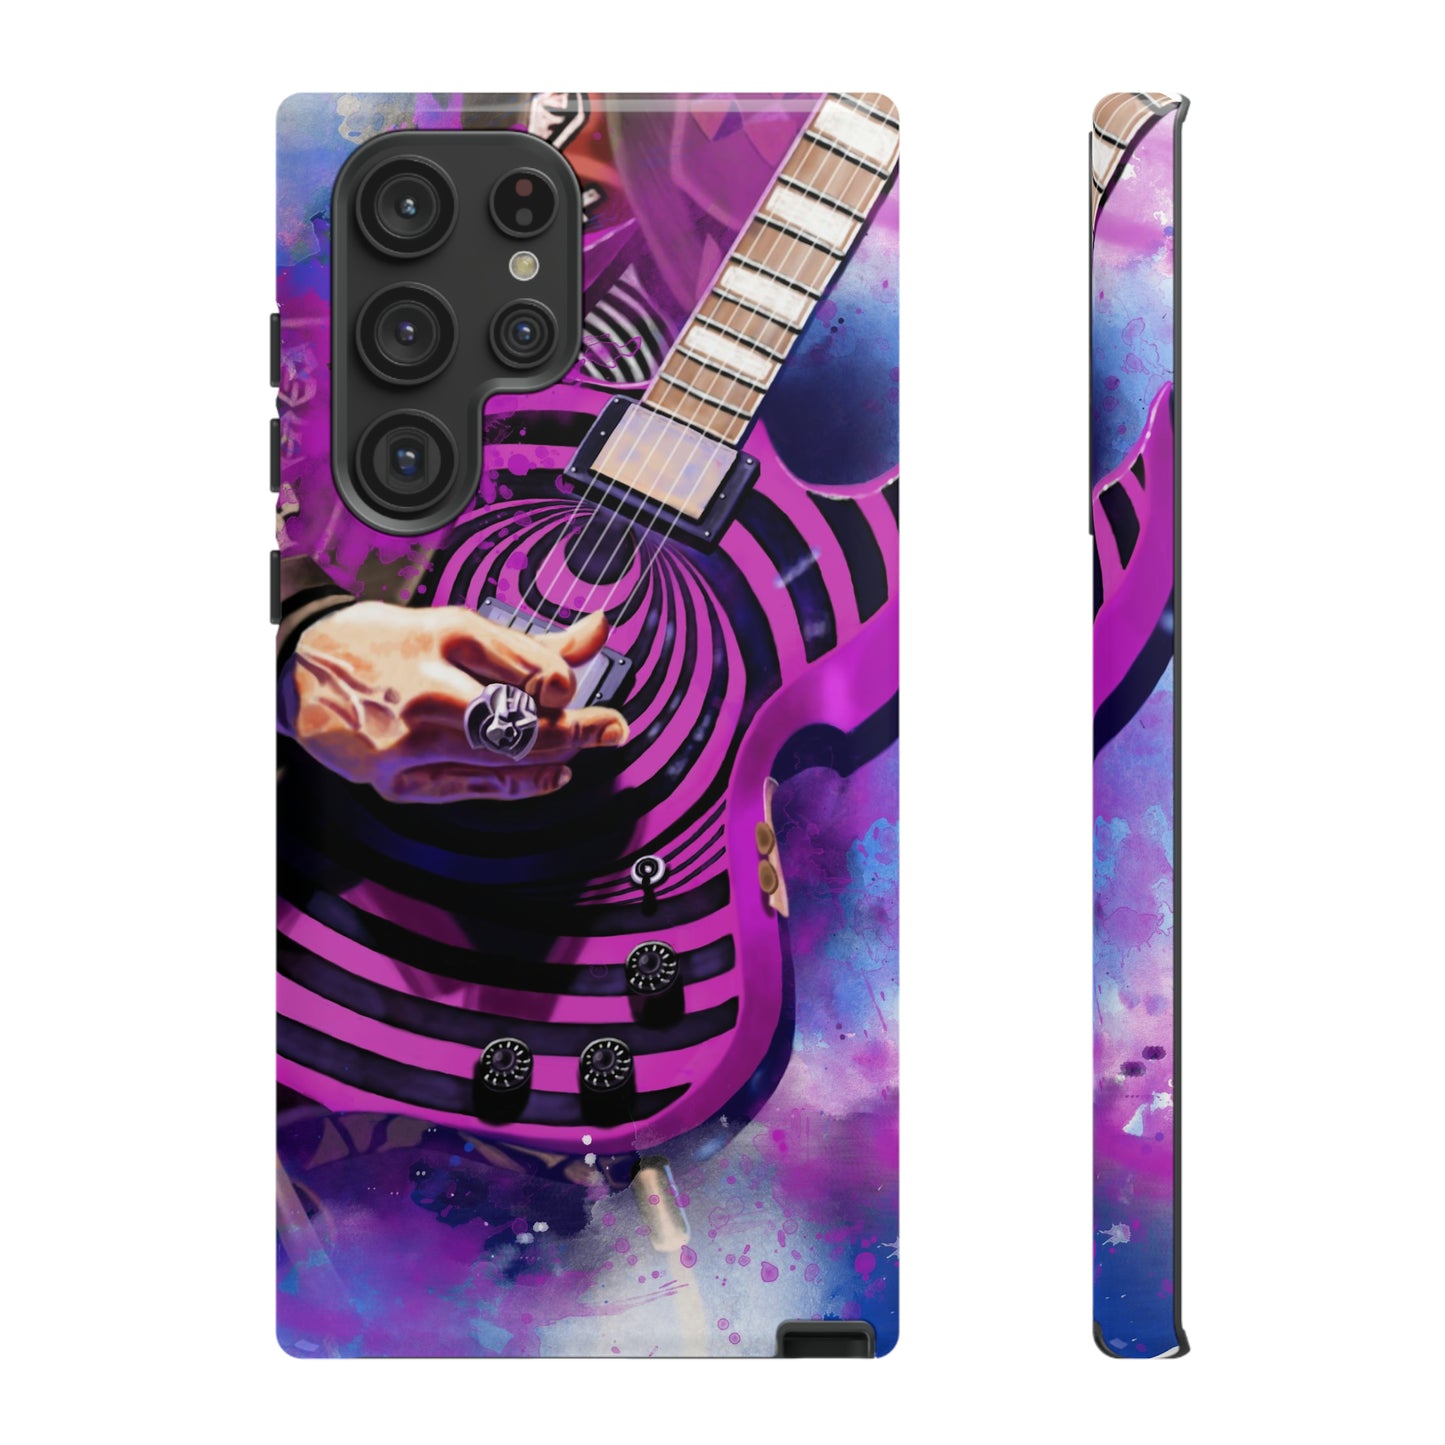 digital painting of a purple-black electric guitar with hand printed on samsung phone case